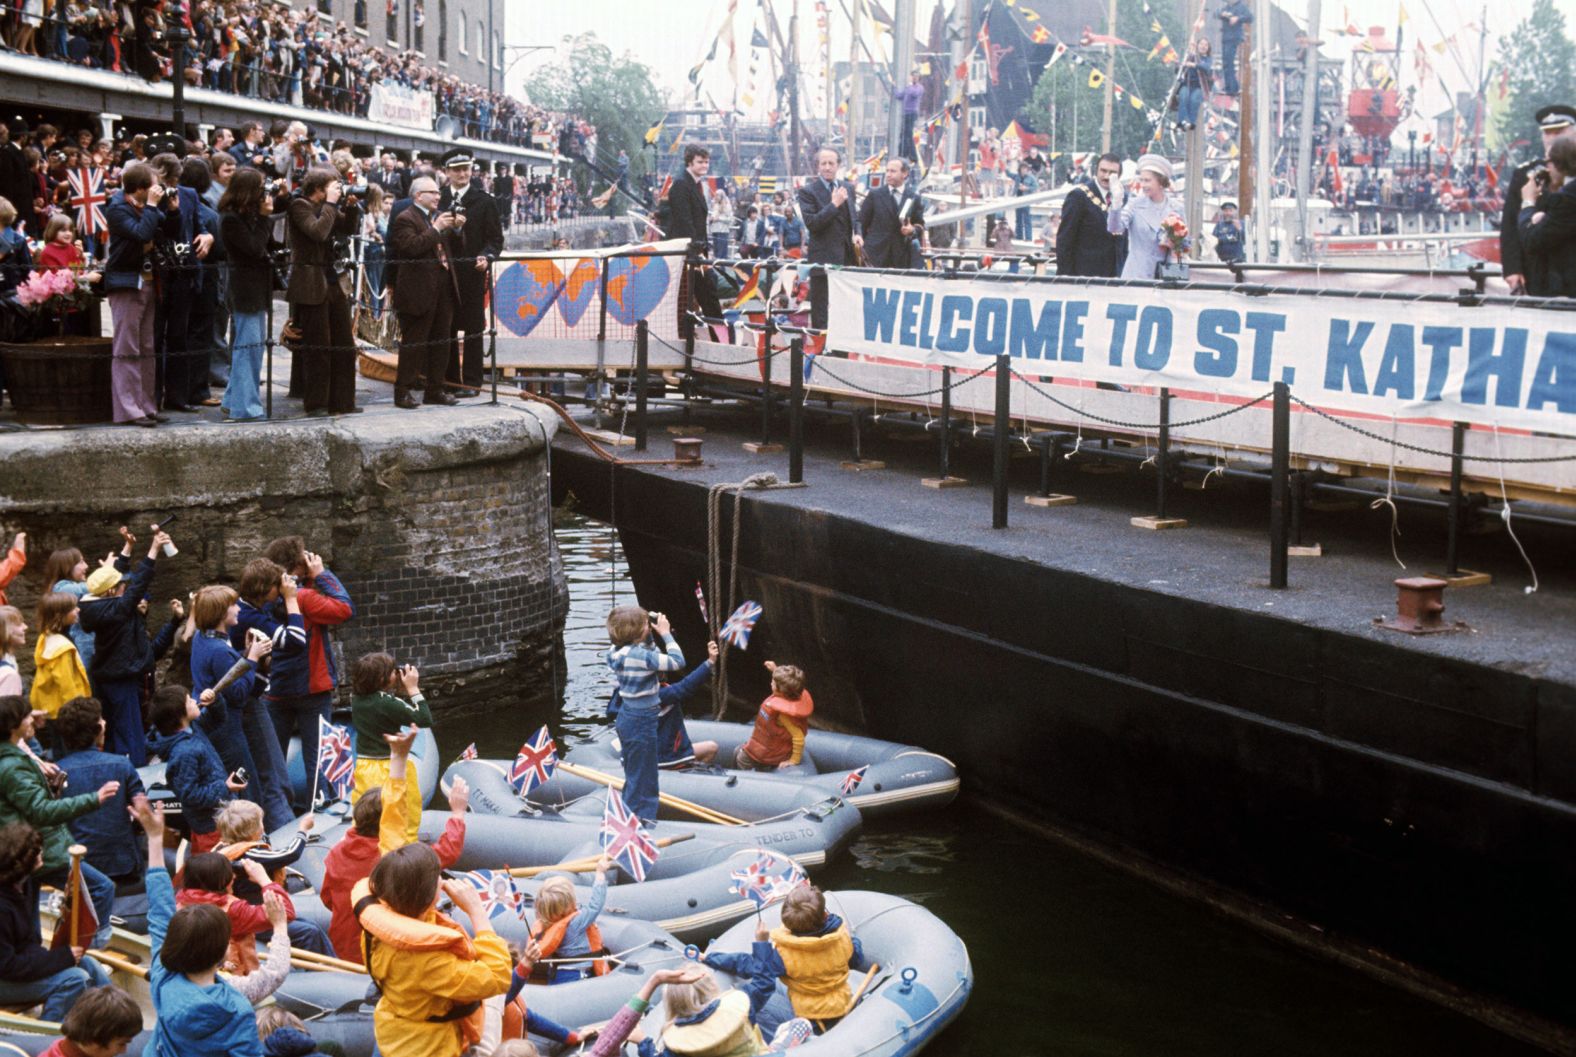 The Queen is welcomed at St. Katharine's Dock near the Tower of London during her Silver Jubilee.